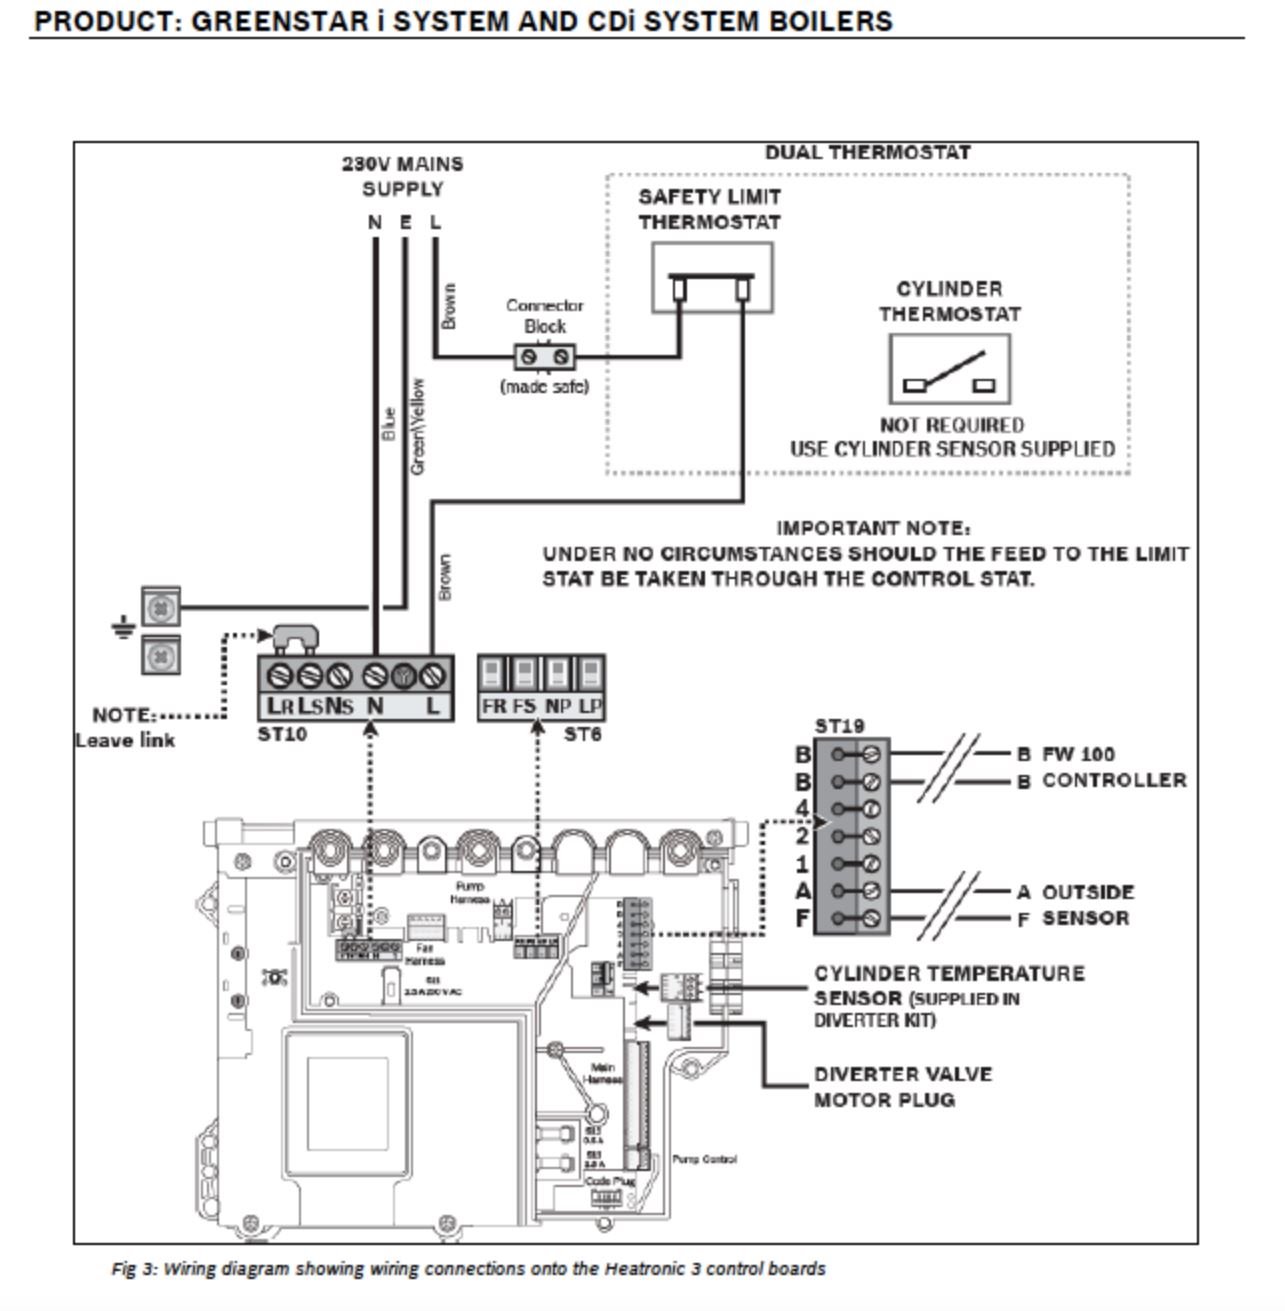 help needed wiring in a smart thermostat - Page 1 - Homes, Gardens and DIY - PistonHeads